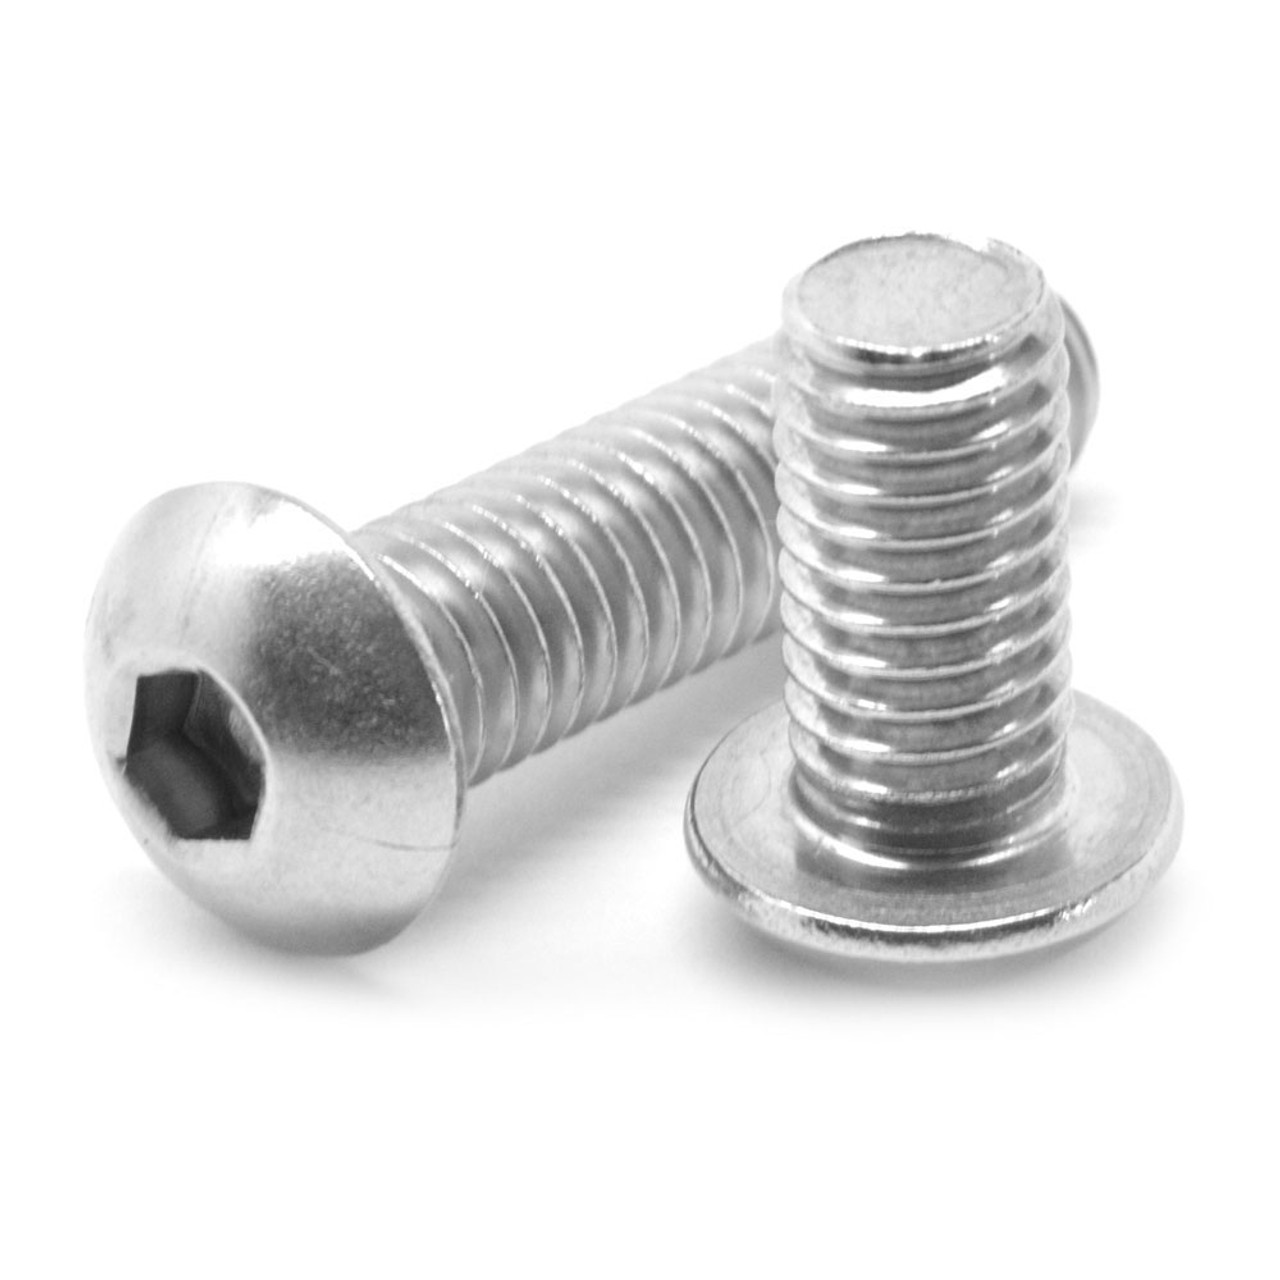 M4 x 0.70 x 35 MM (FT) Coarse Thread ISO 7380 Socket Button Head Cap Screw Stainless Steel 18-8